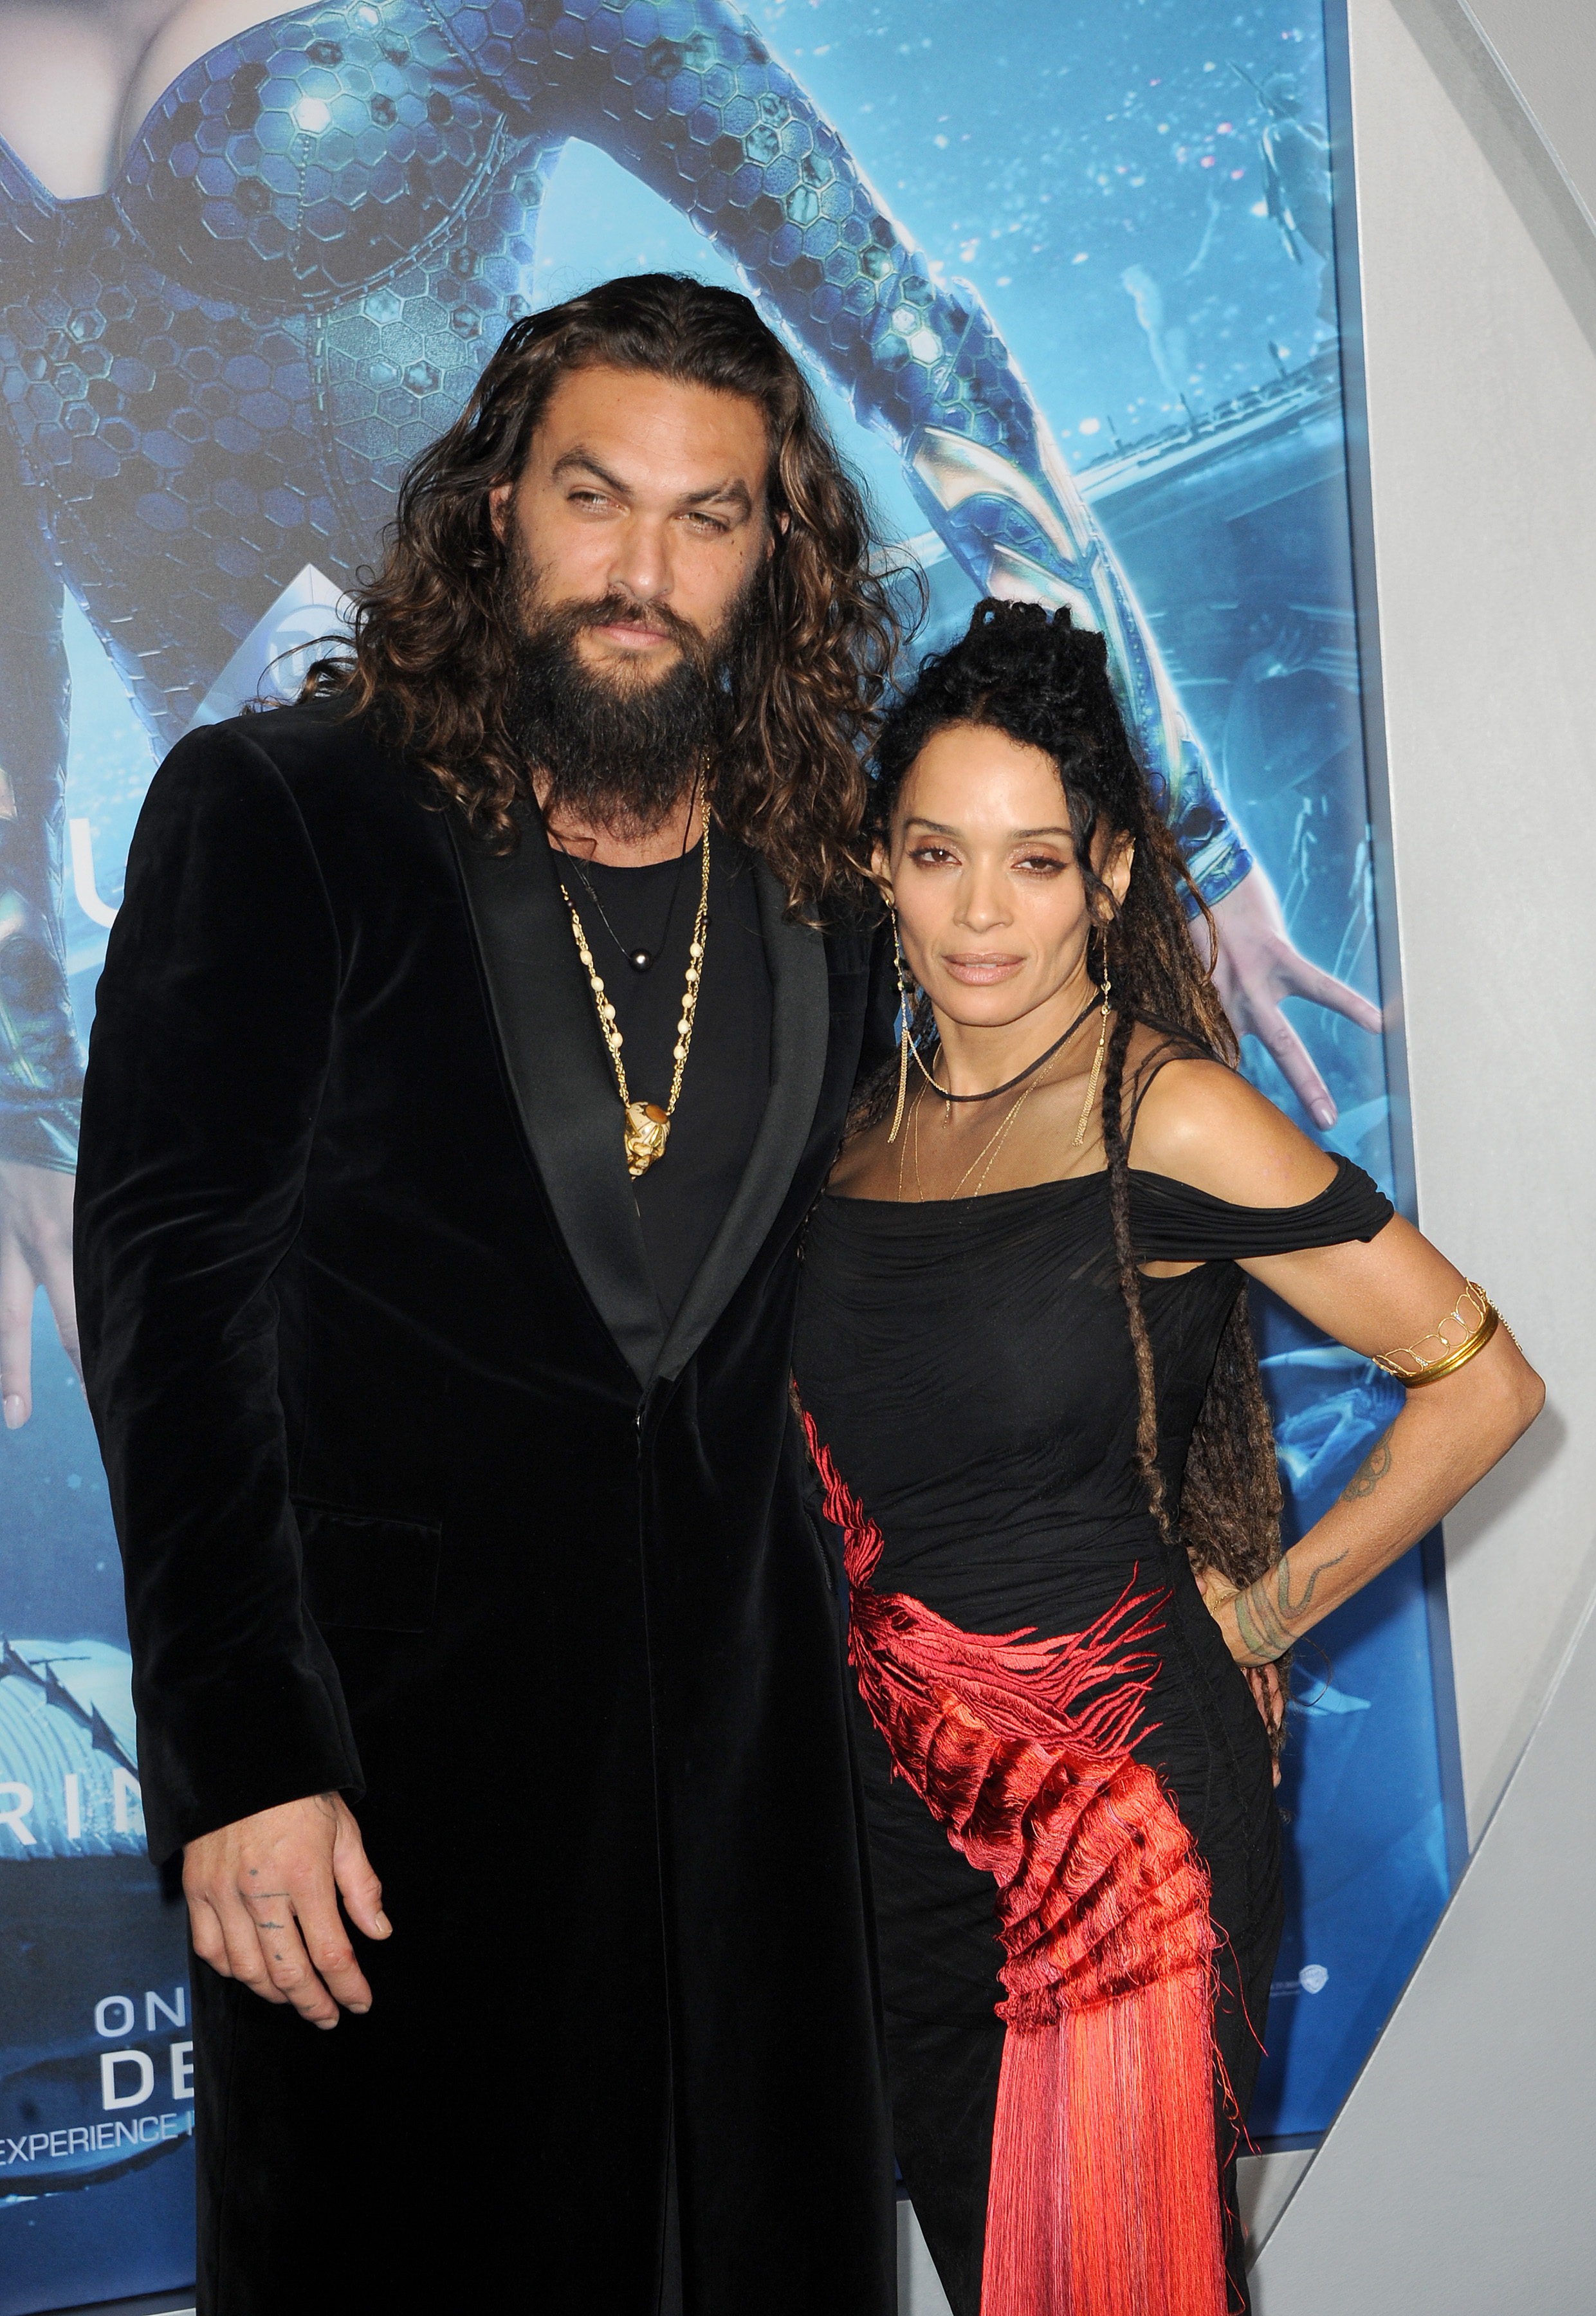 Lisa Bonet and Jason Momoa at the Los Angeles premiere of 'Aquaman' held at the TCL Chinese Theatre in Hollywood, USA on December 12, 2018.